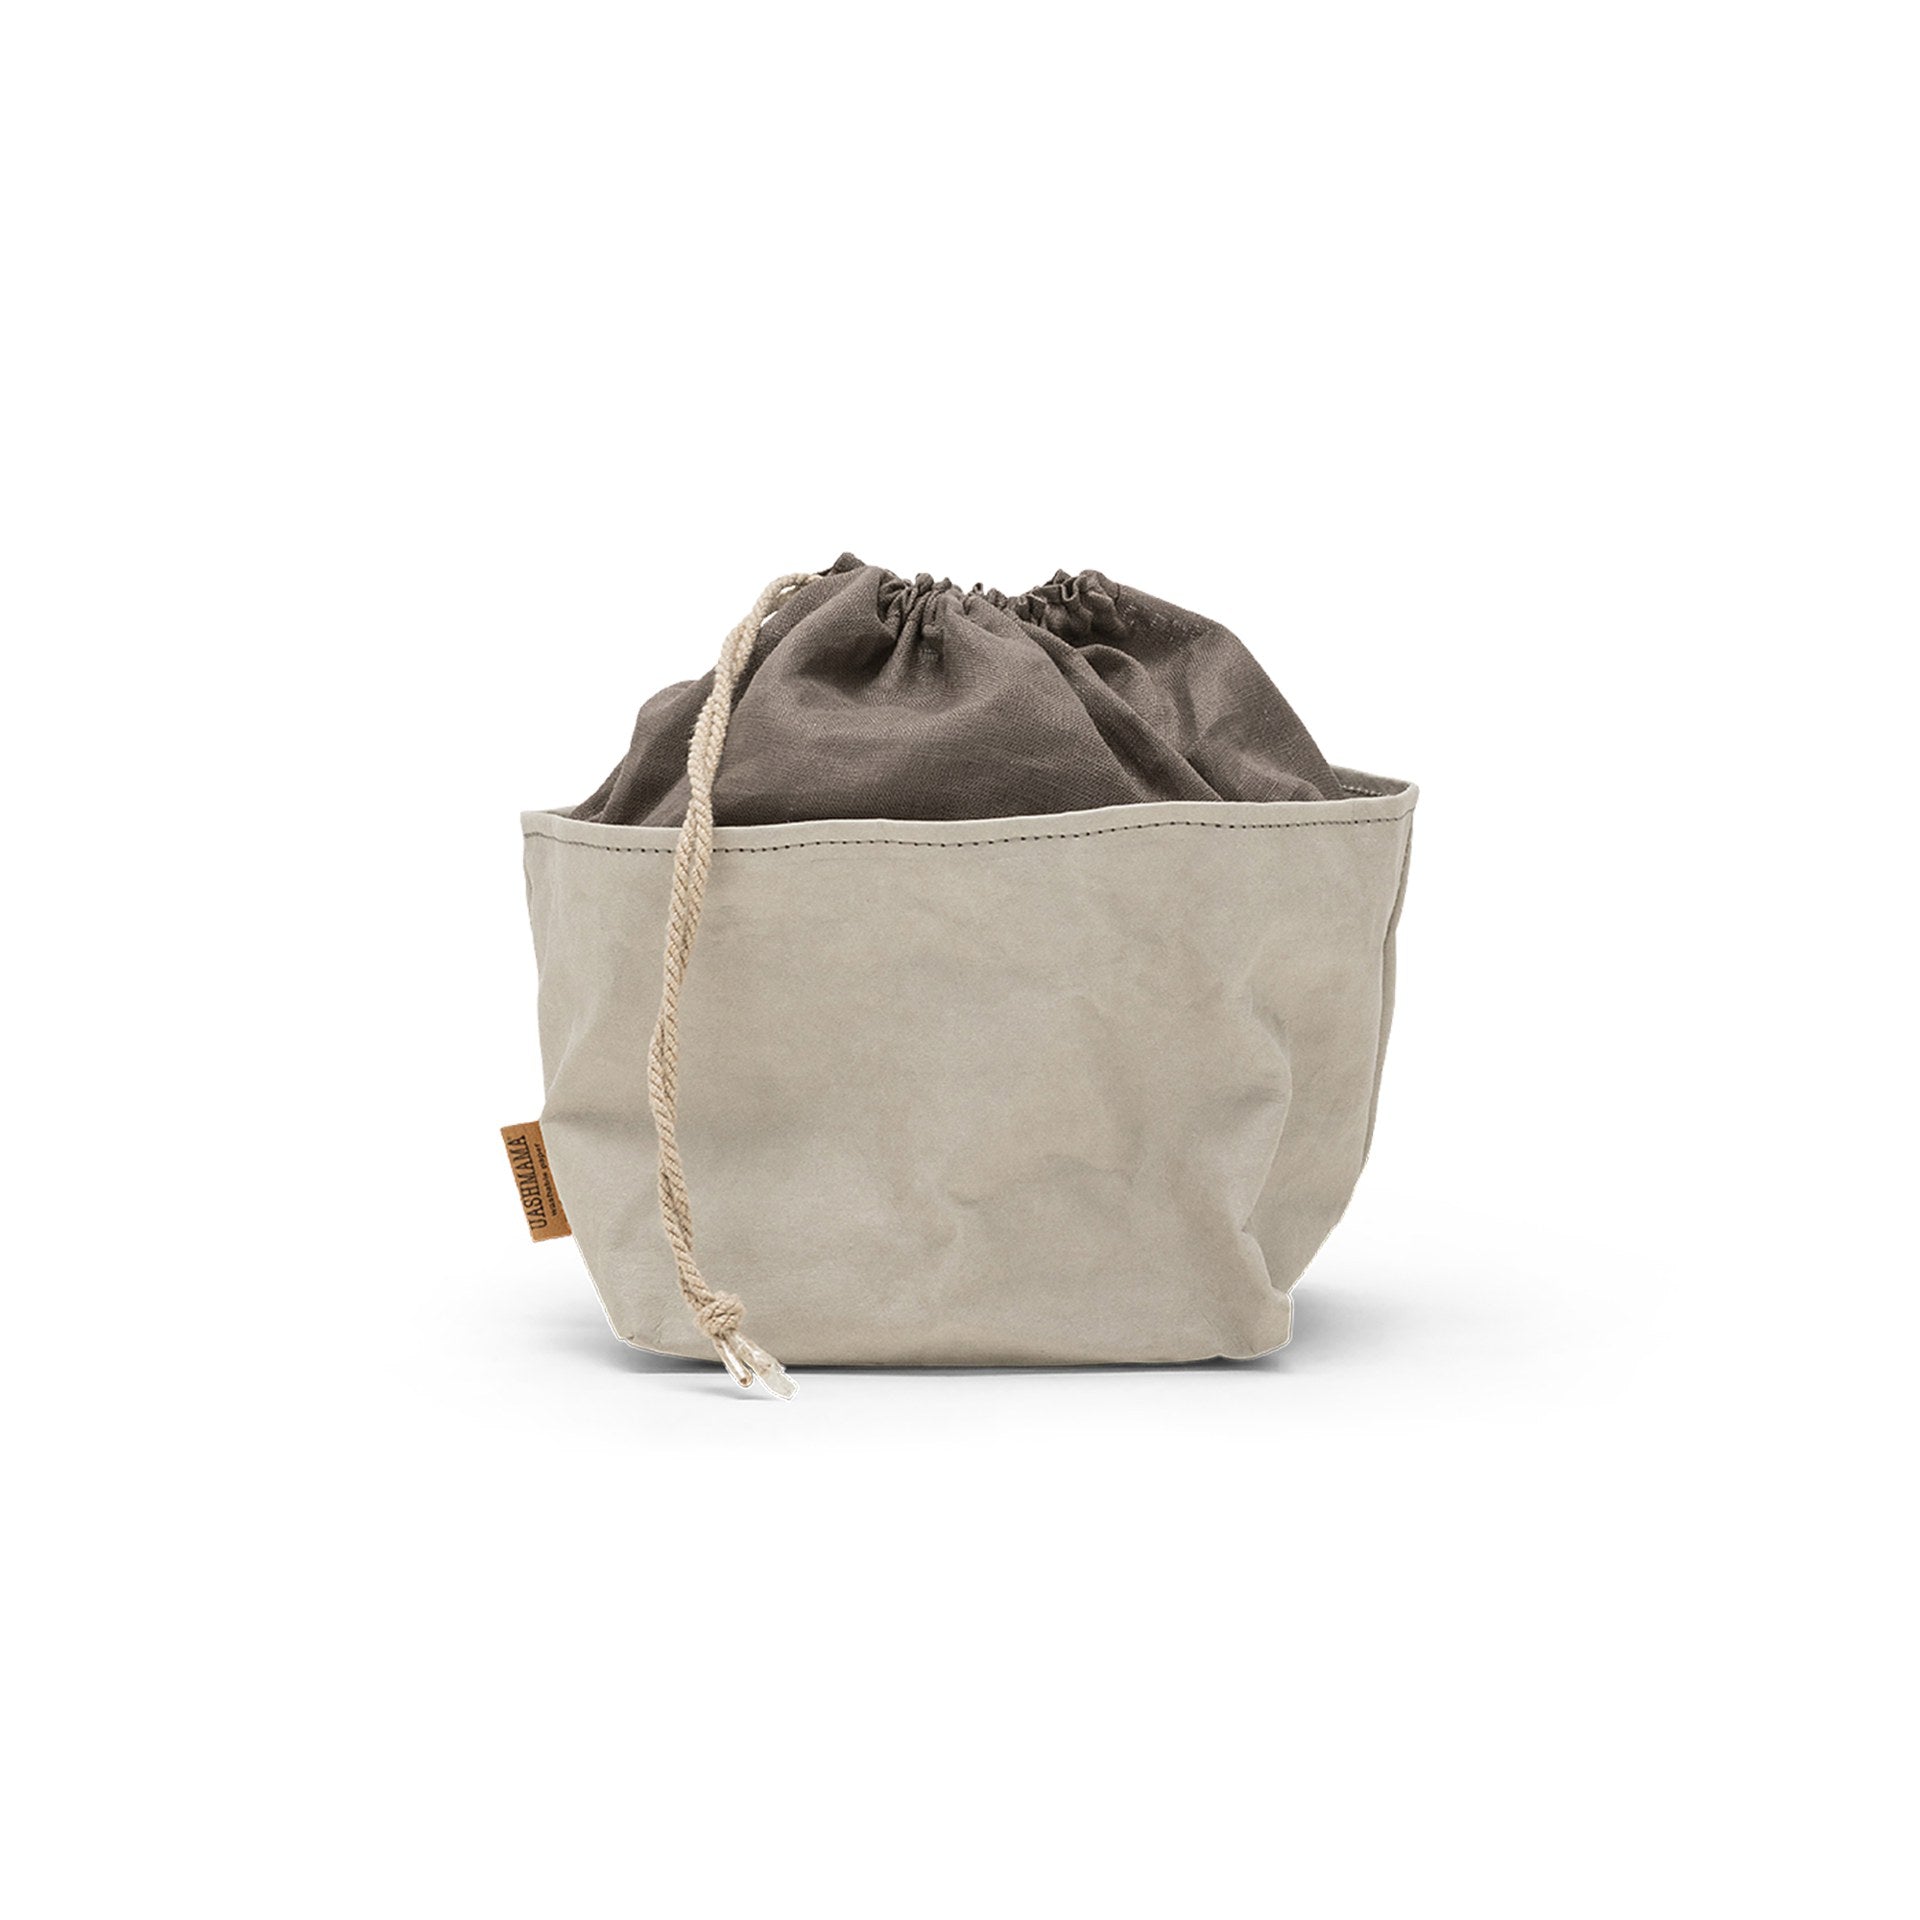 A washable paper bread bag with a drawstring organic linen top is shown. The bag has a small UASHMAMA logo label on the left hand side and fastens with a beige cord drawstring. The bag is pale grey in colour with a dark grey linen drawstring top.